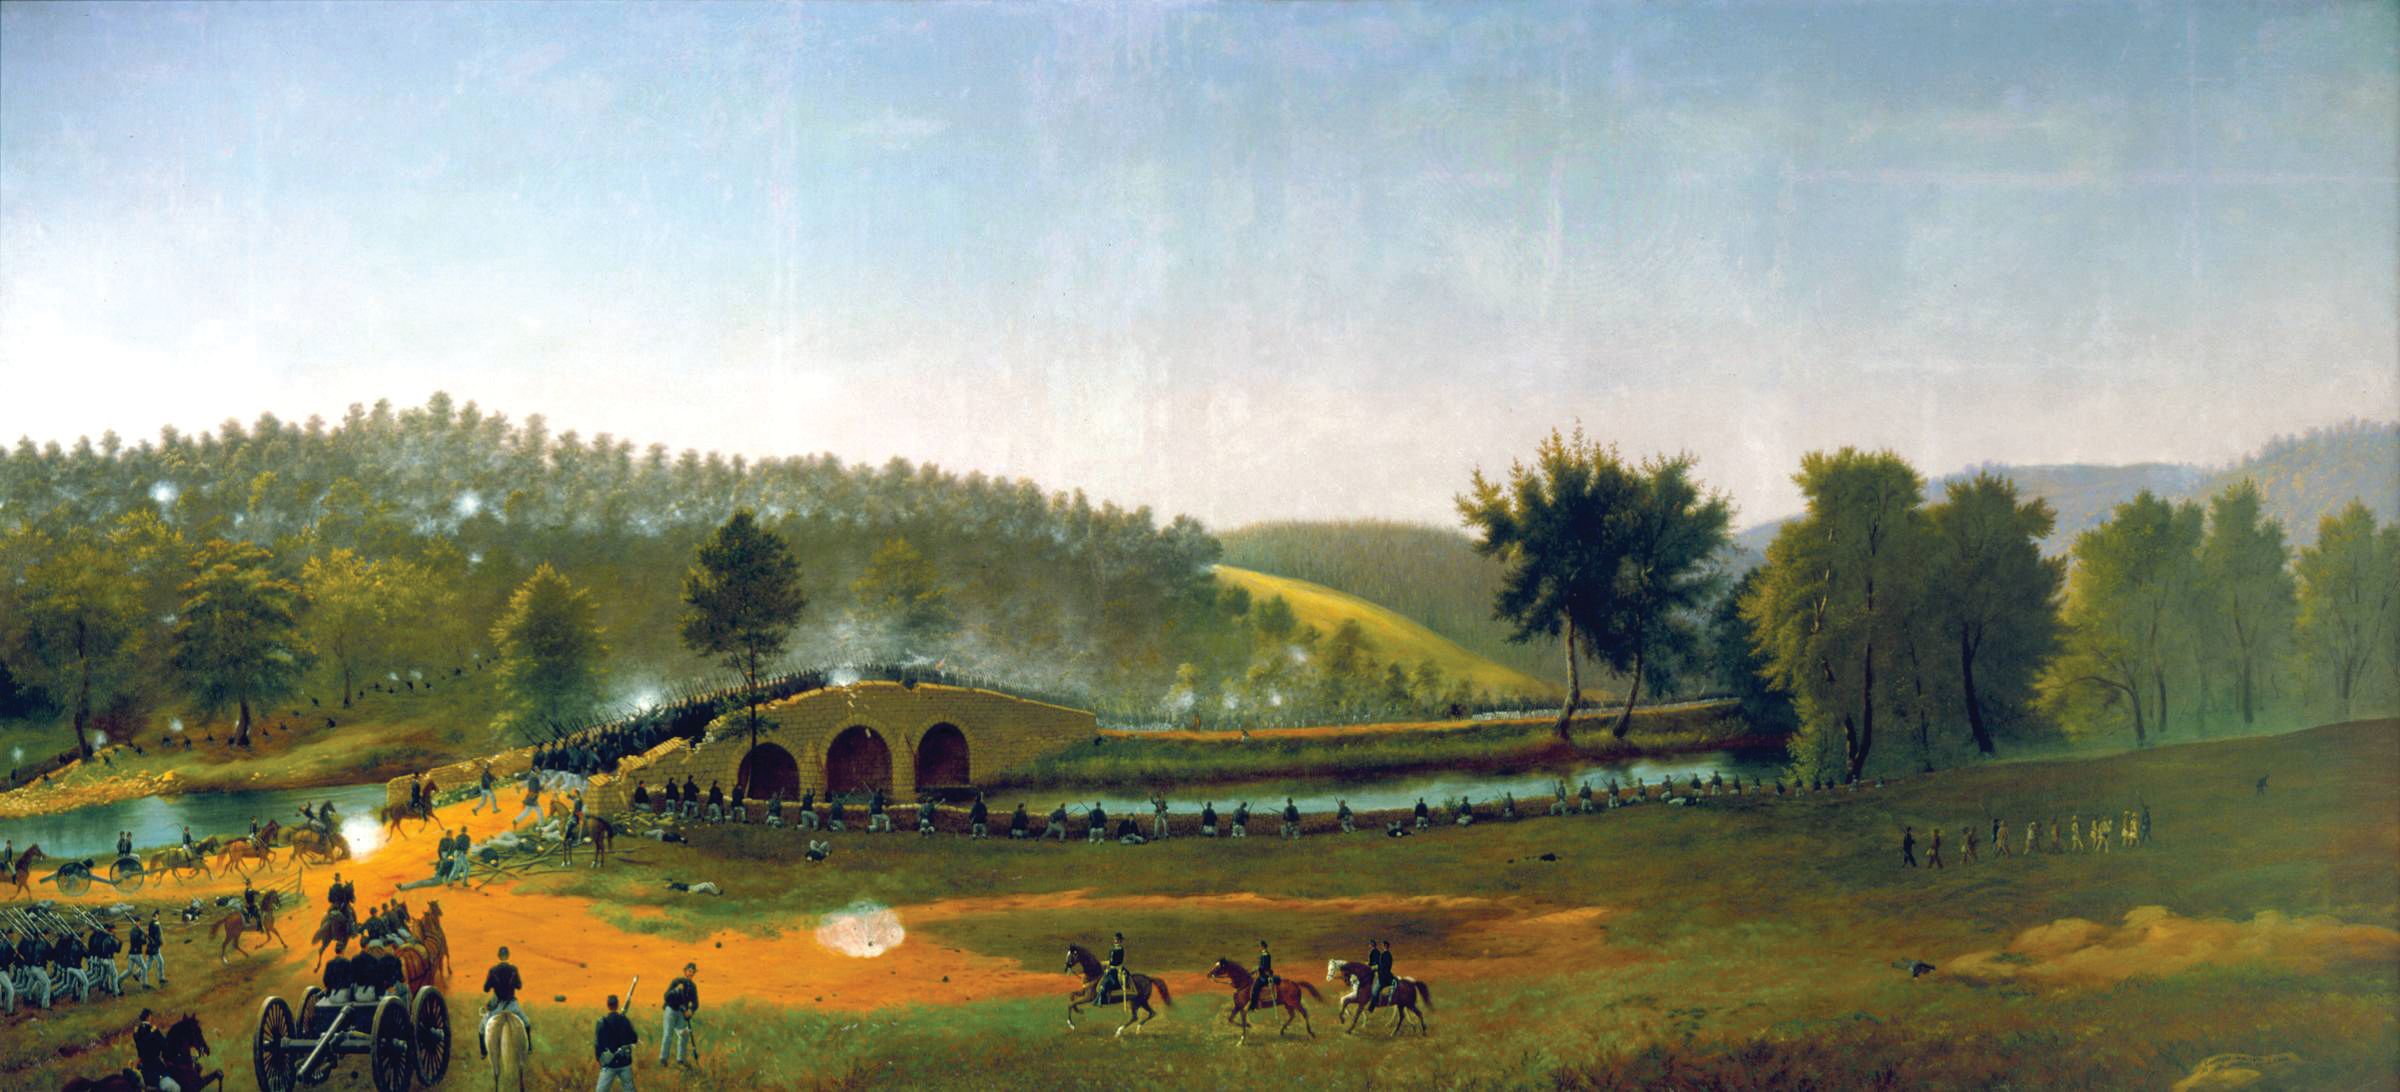 After squandering four hours in which two understrength Confederate regiments held back the Union IX Corps, a spirited attack captured the bridge at midday. Fairchild's brigade participated in the flanking move through a downstream ford.